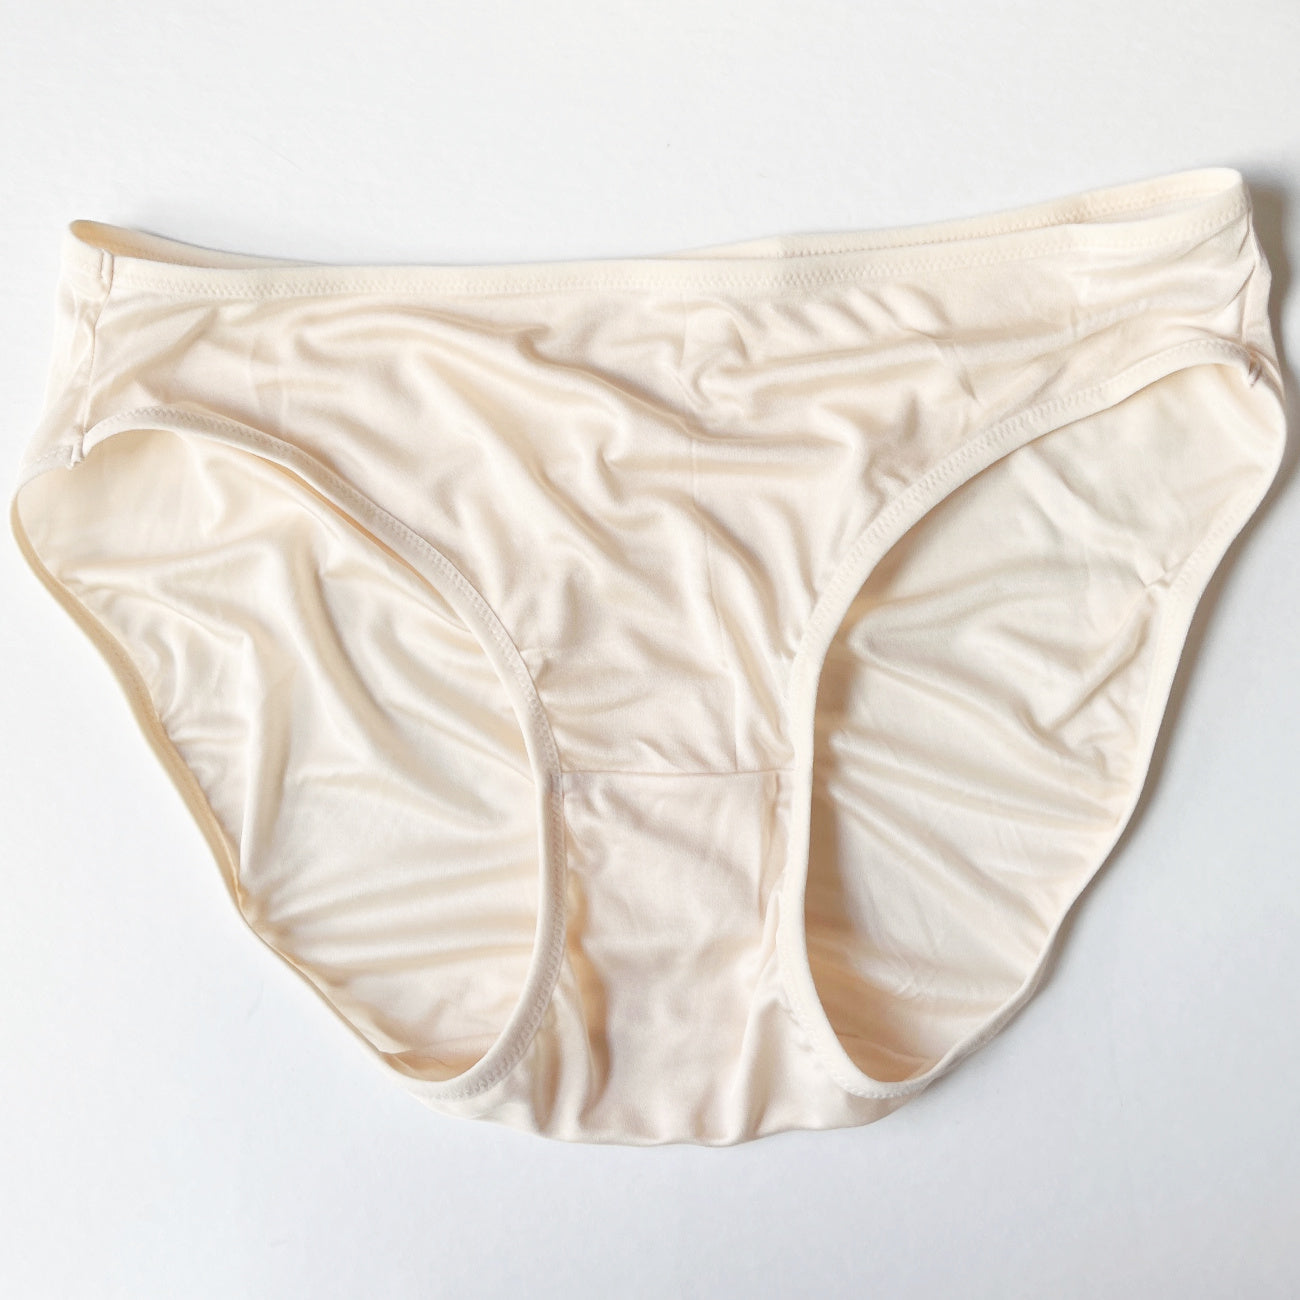 natural silk panties for women " Canadian made lingerie and underwear 